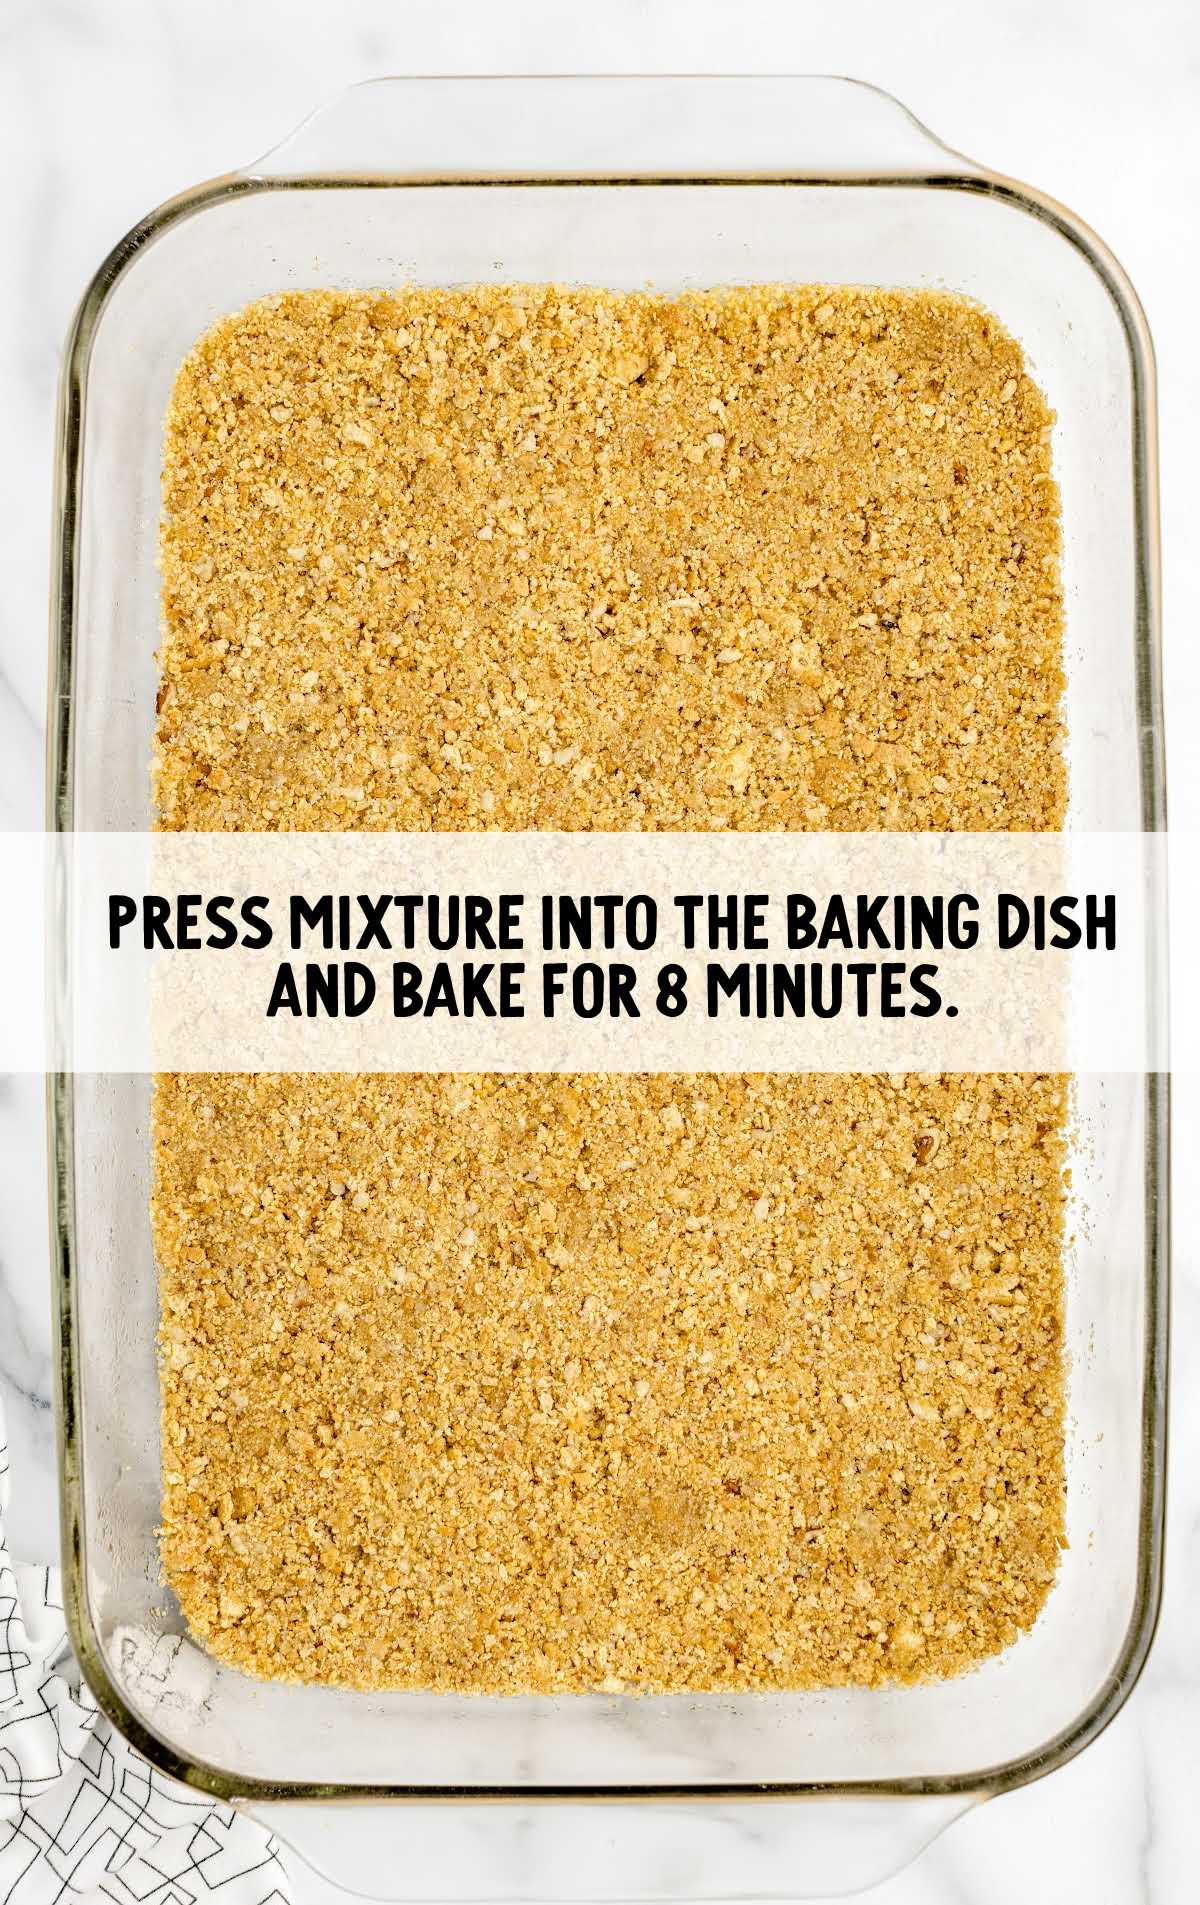 crust mixture spread in a baking dish